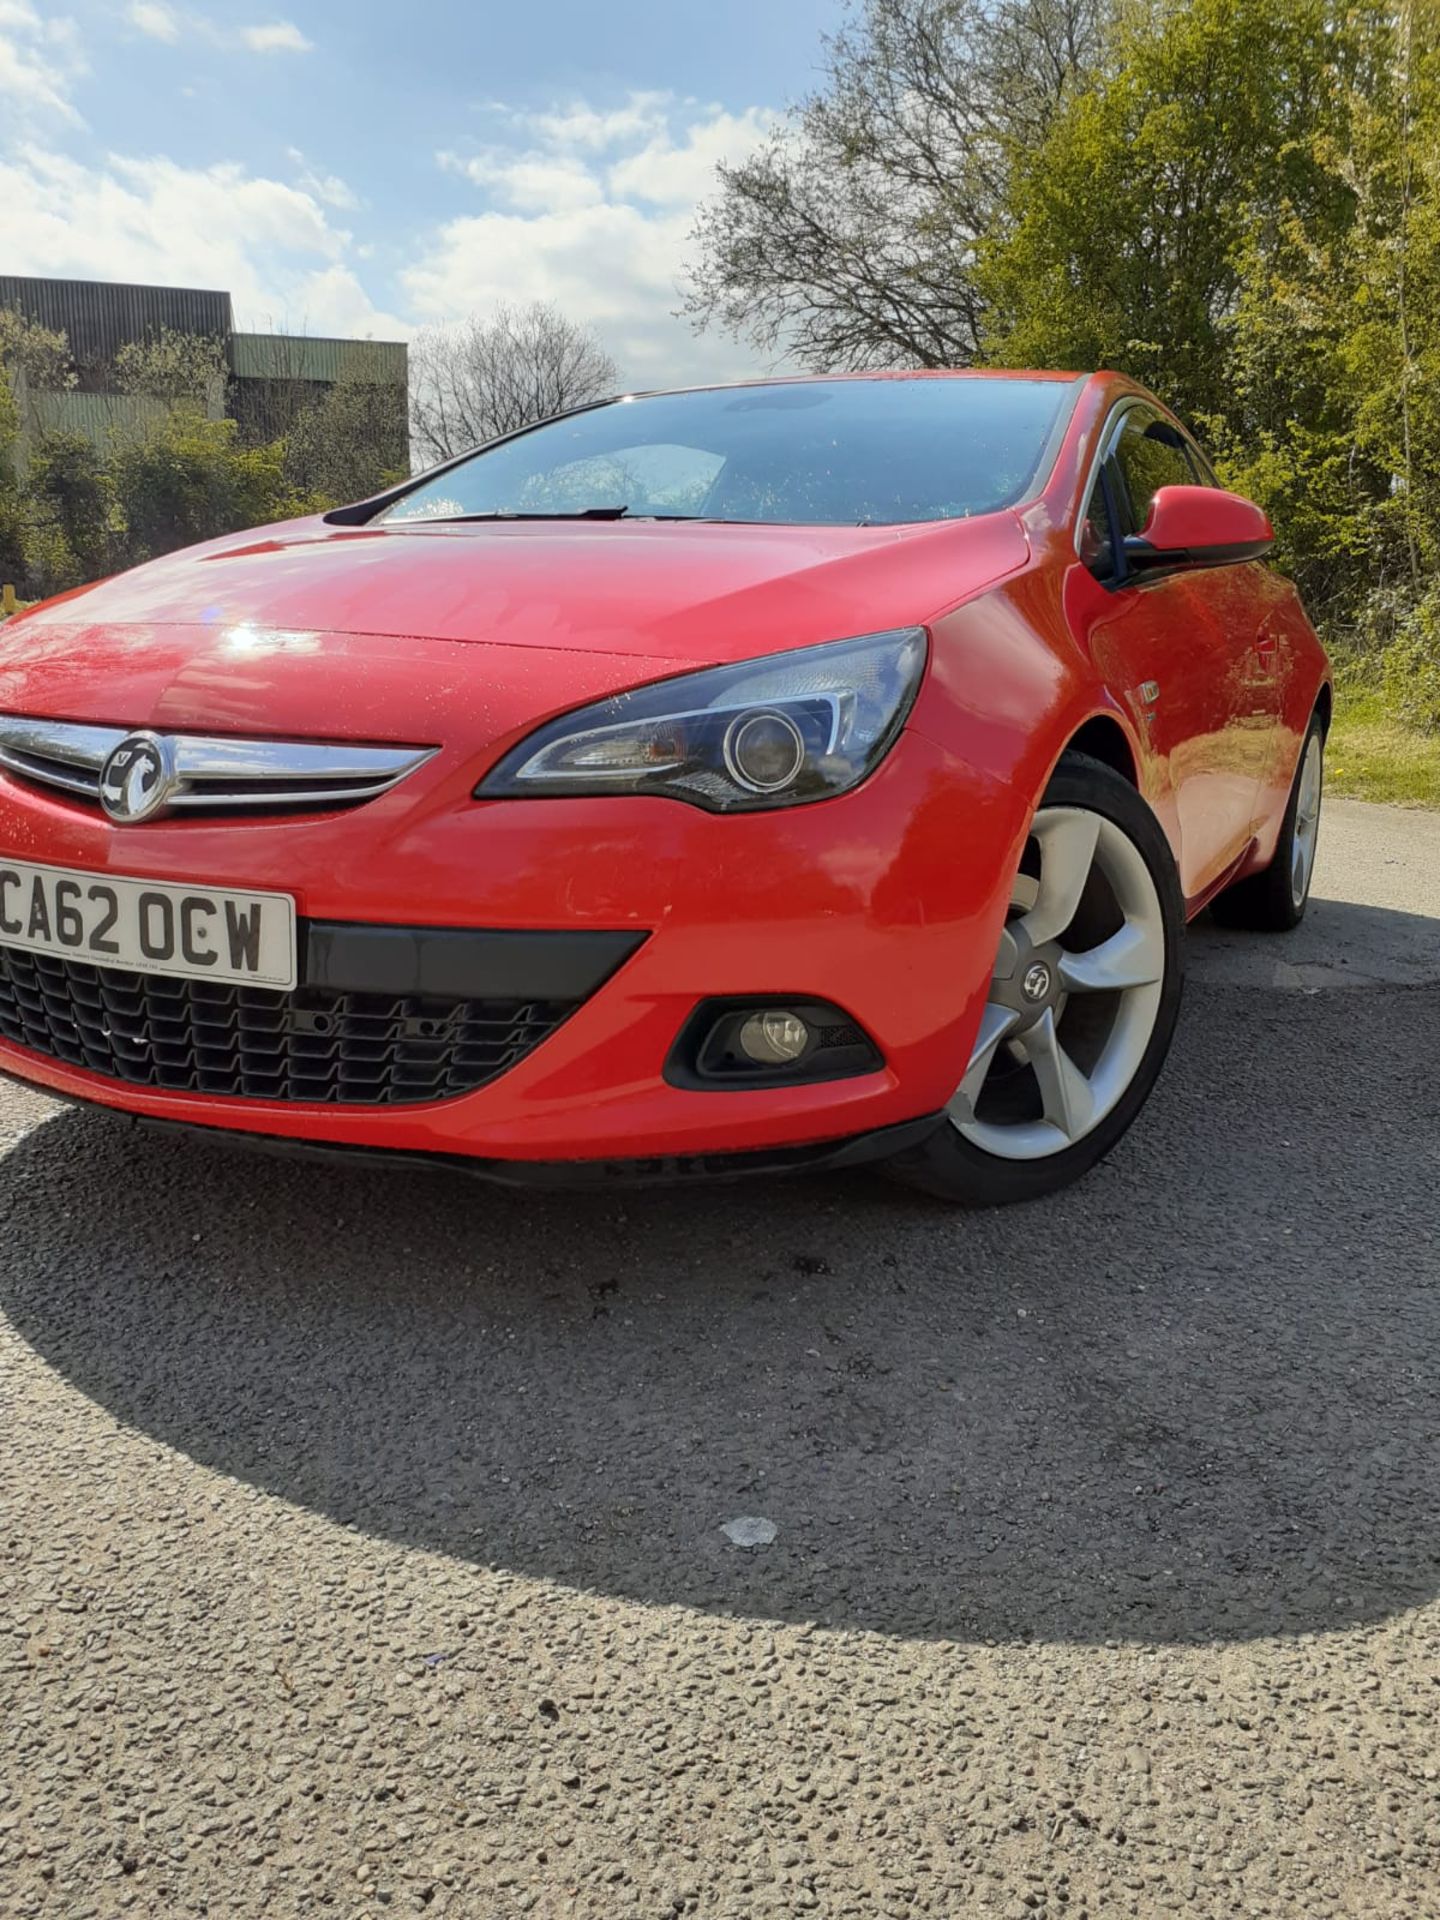 2013 VAUXHALL ASTRA GTC SRI CDTI S/S, 3 DOOR HATCHBACK, SHOWING 3 PREVIOUS KEEPERS, DIESEL ENGINE - Image 2 of 16